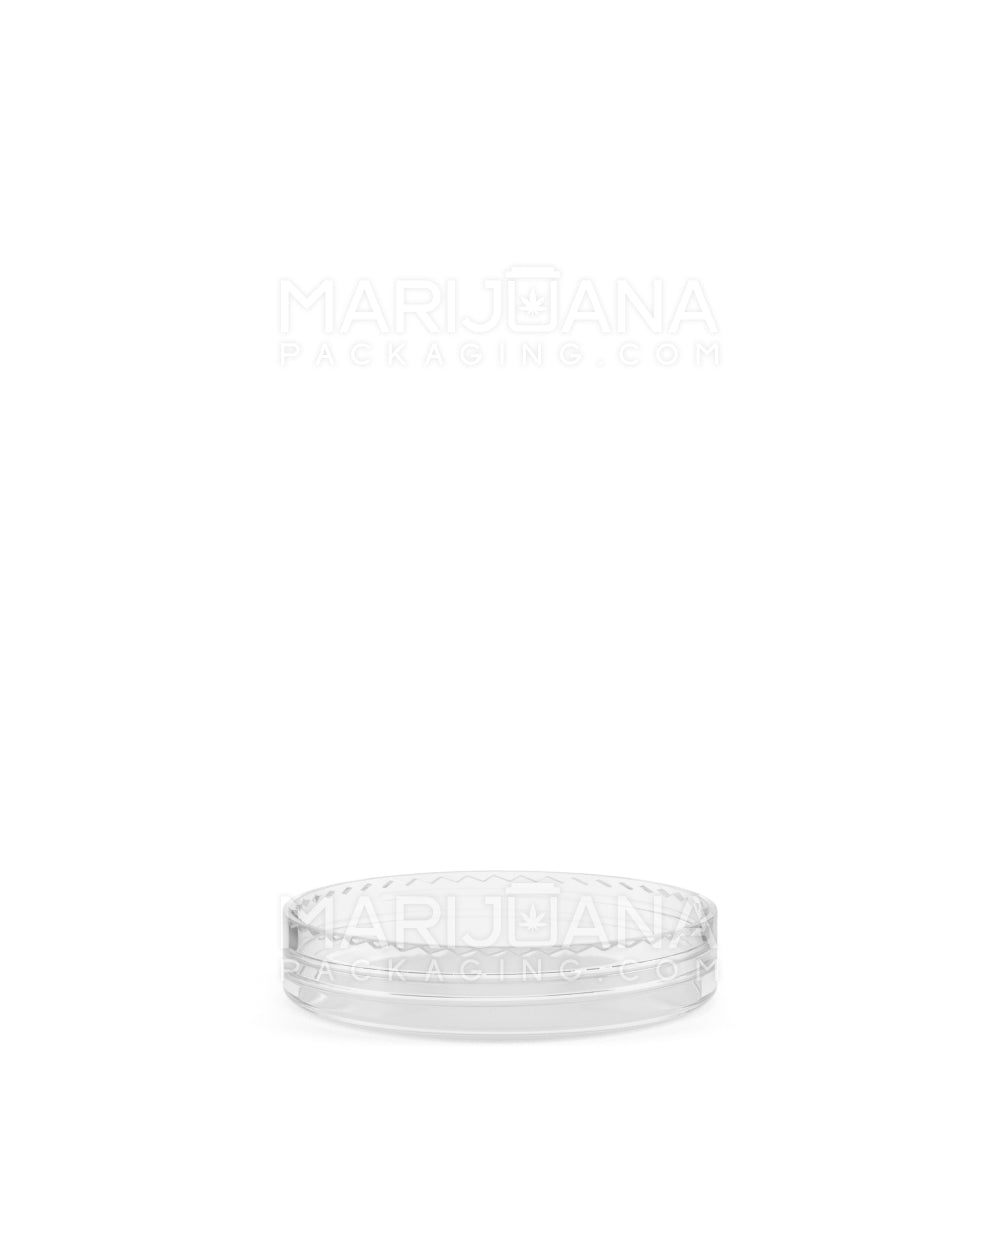 Clear Concentrate Containers w/ Screw Top Cap | 7mL - Acrylic | Sample - 11